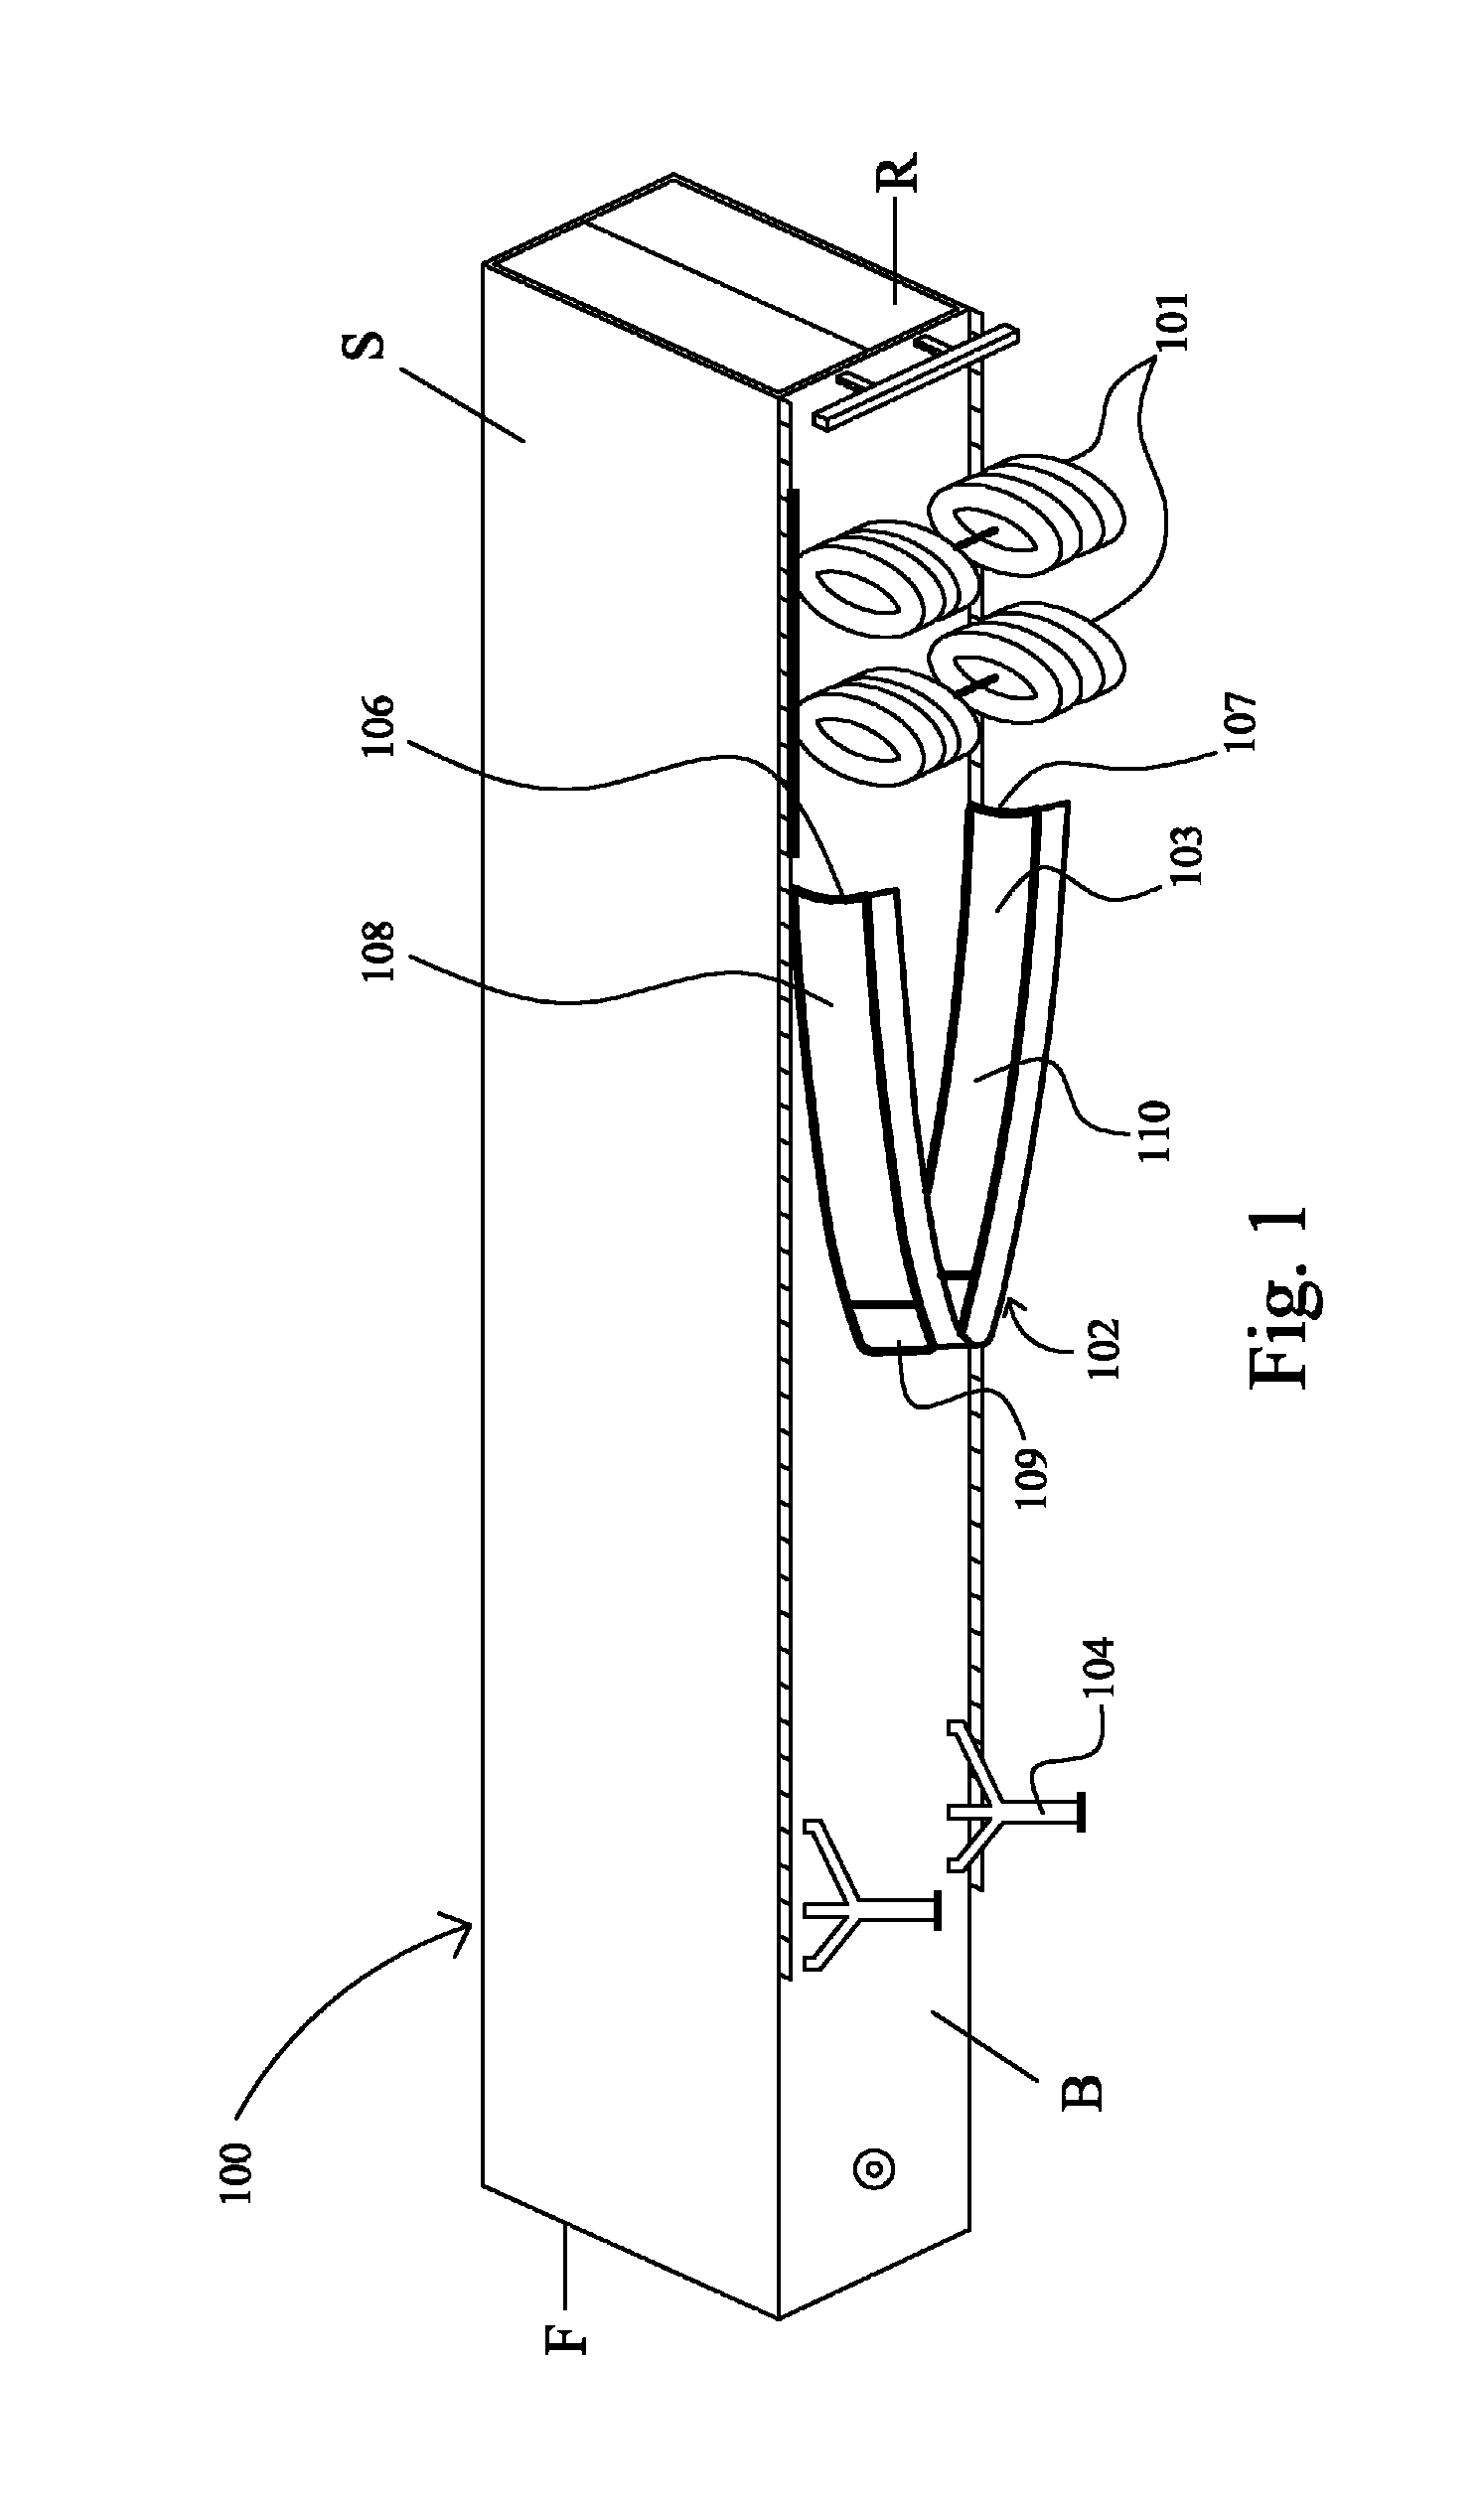 Apparatus and method for mounting an aerodynamic add-on device onto a transport vehicle